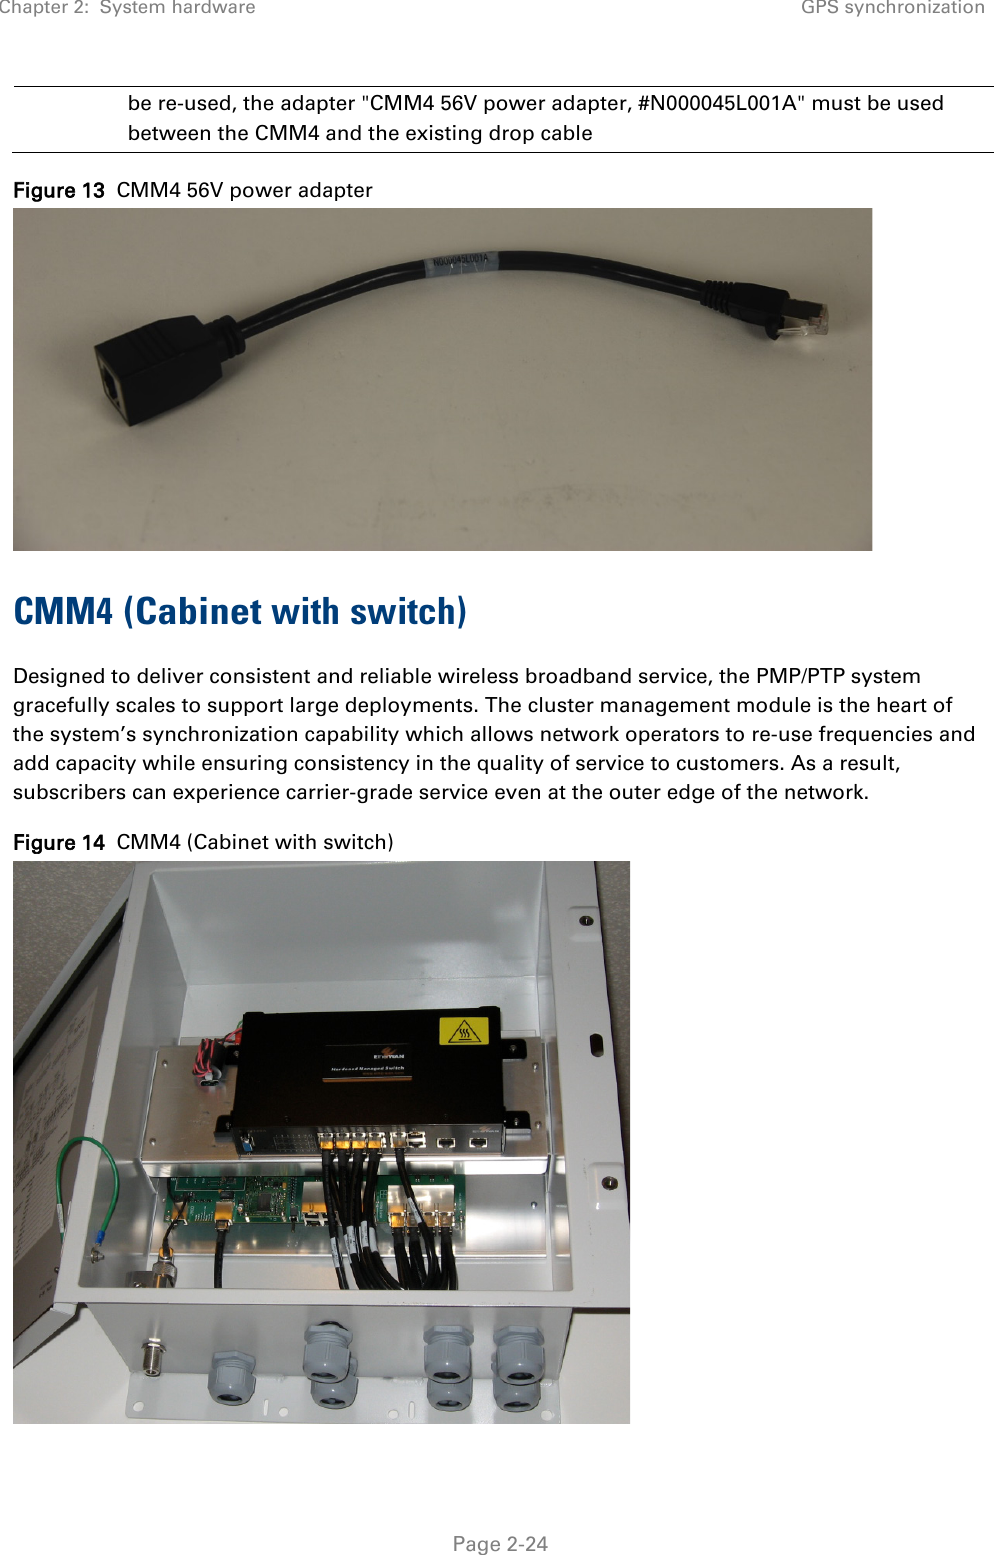 Chapter 2:  System hardware GPS synchronization   Page 2-24 be re-used, the adapter &quot;CMM4 56V power adapter, #N000045L001A&quot; must be used between the CMM4 and the existing drop cable Figure 13  CMM4 56V power adapter  CMM4 (Cabinet with switch) Designed to deliver consistent and reliable wireless broadband service, the PMP/PTP system gracefully scales to support large deployments. The cluster management module is the heart of the system’s synchronization capability which allows network operators to re-use frequencies and add capacity while ensuring consistency in the quality of service to customers. As a result, subscribers can experience carrier-grade service even at the outer edge of the network. Figure 14  CMM4 (Cabinet with switch)  